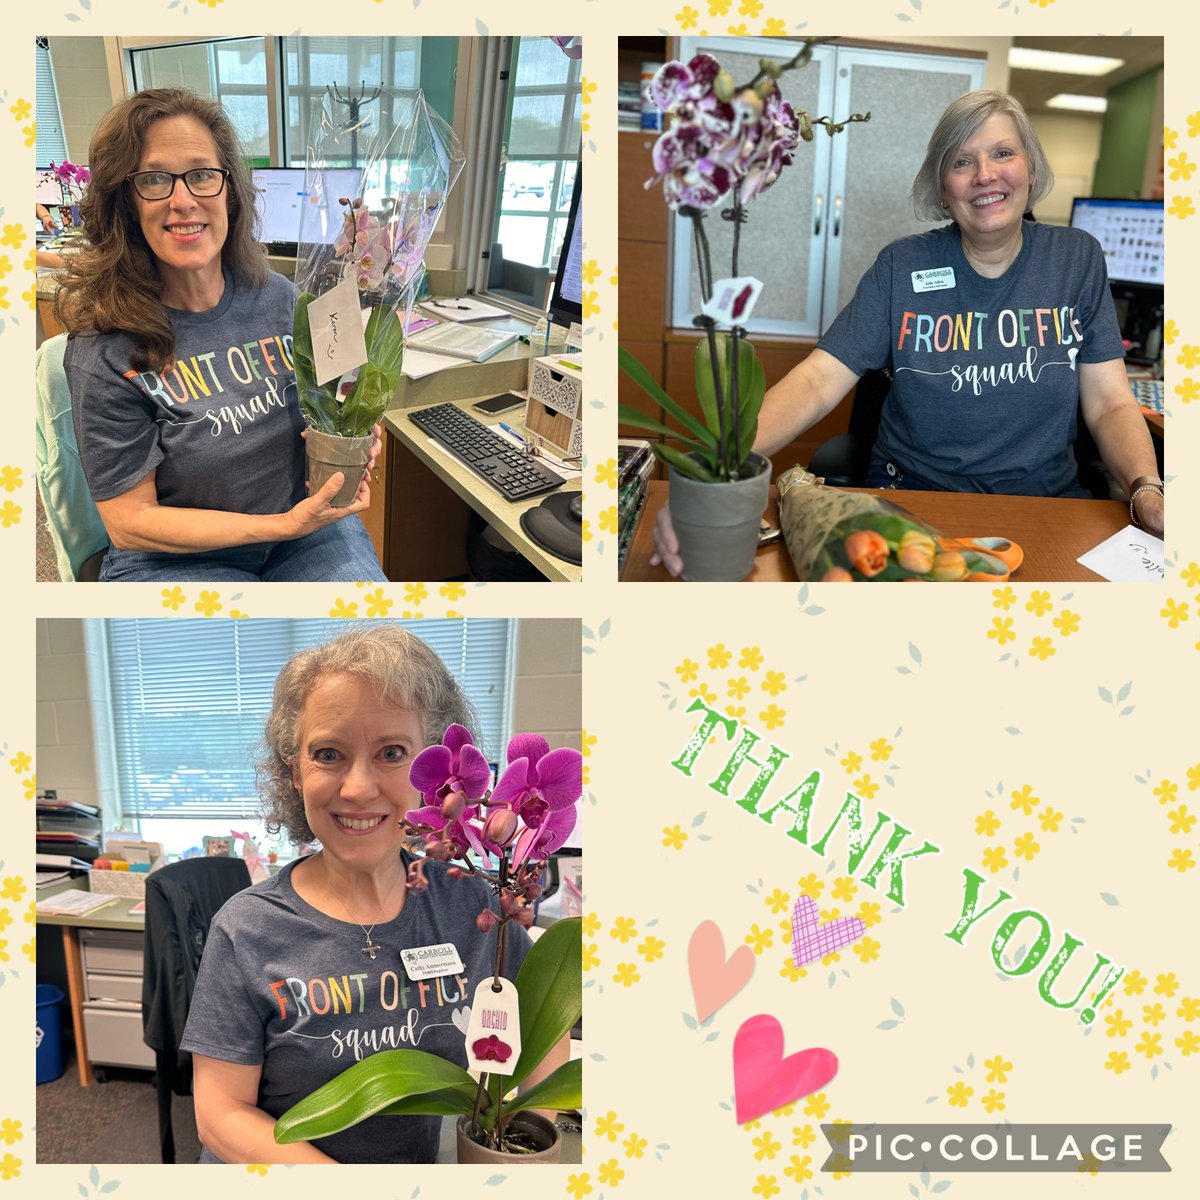 Thank you to our administrative professionals. Karen, Jolie, and Cathy work tirelessly to ensure our school runs smoothly! We are so thankful for ALL they do! #AdminProfessionalsDay #InspireExcellence